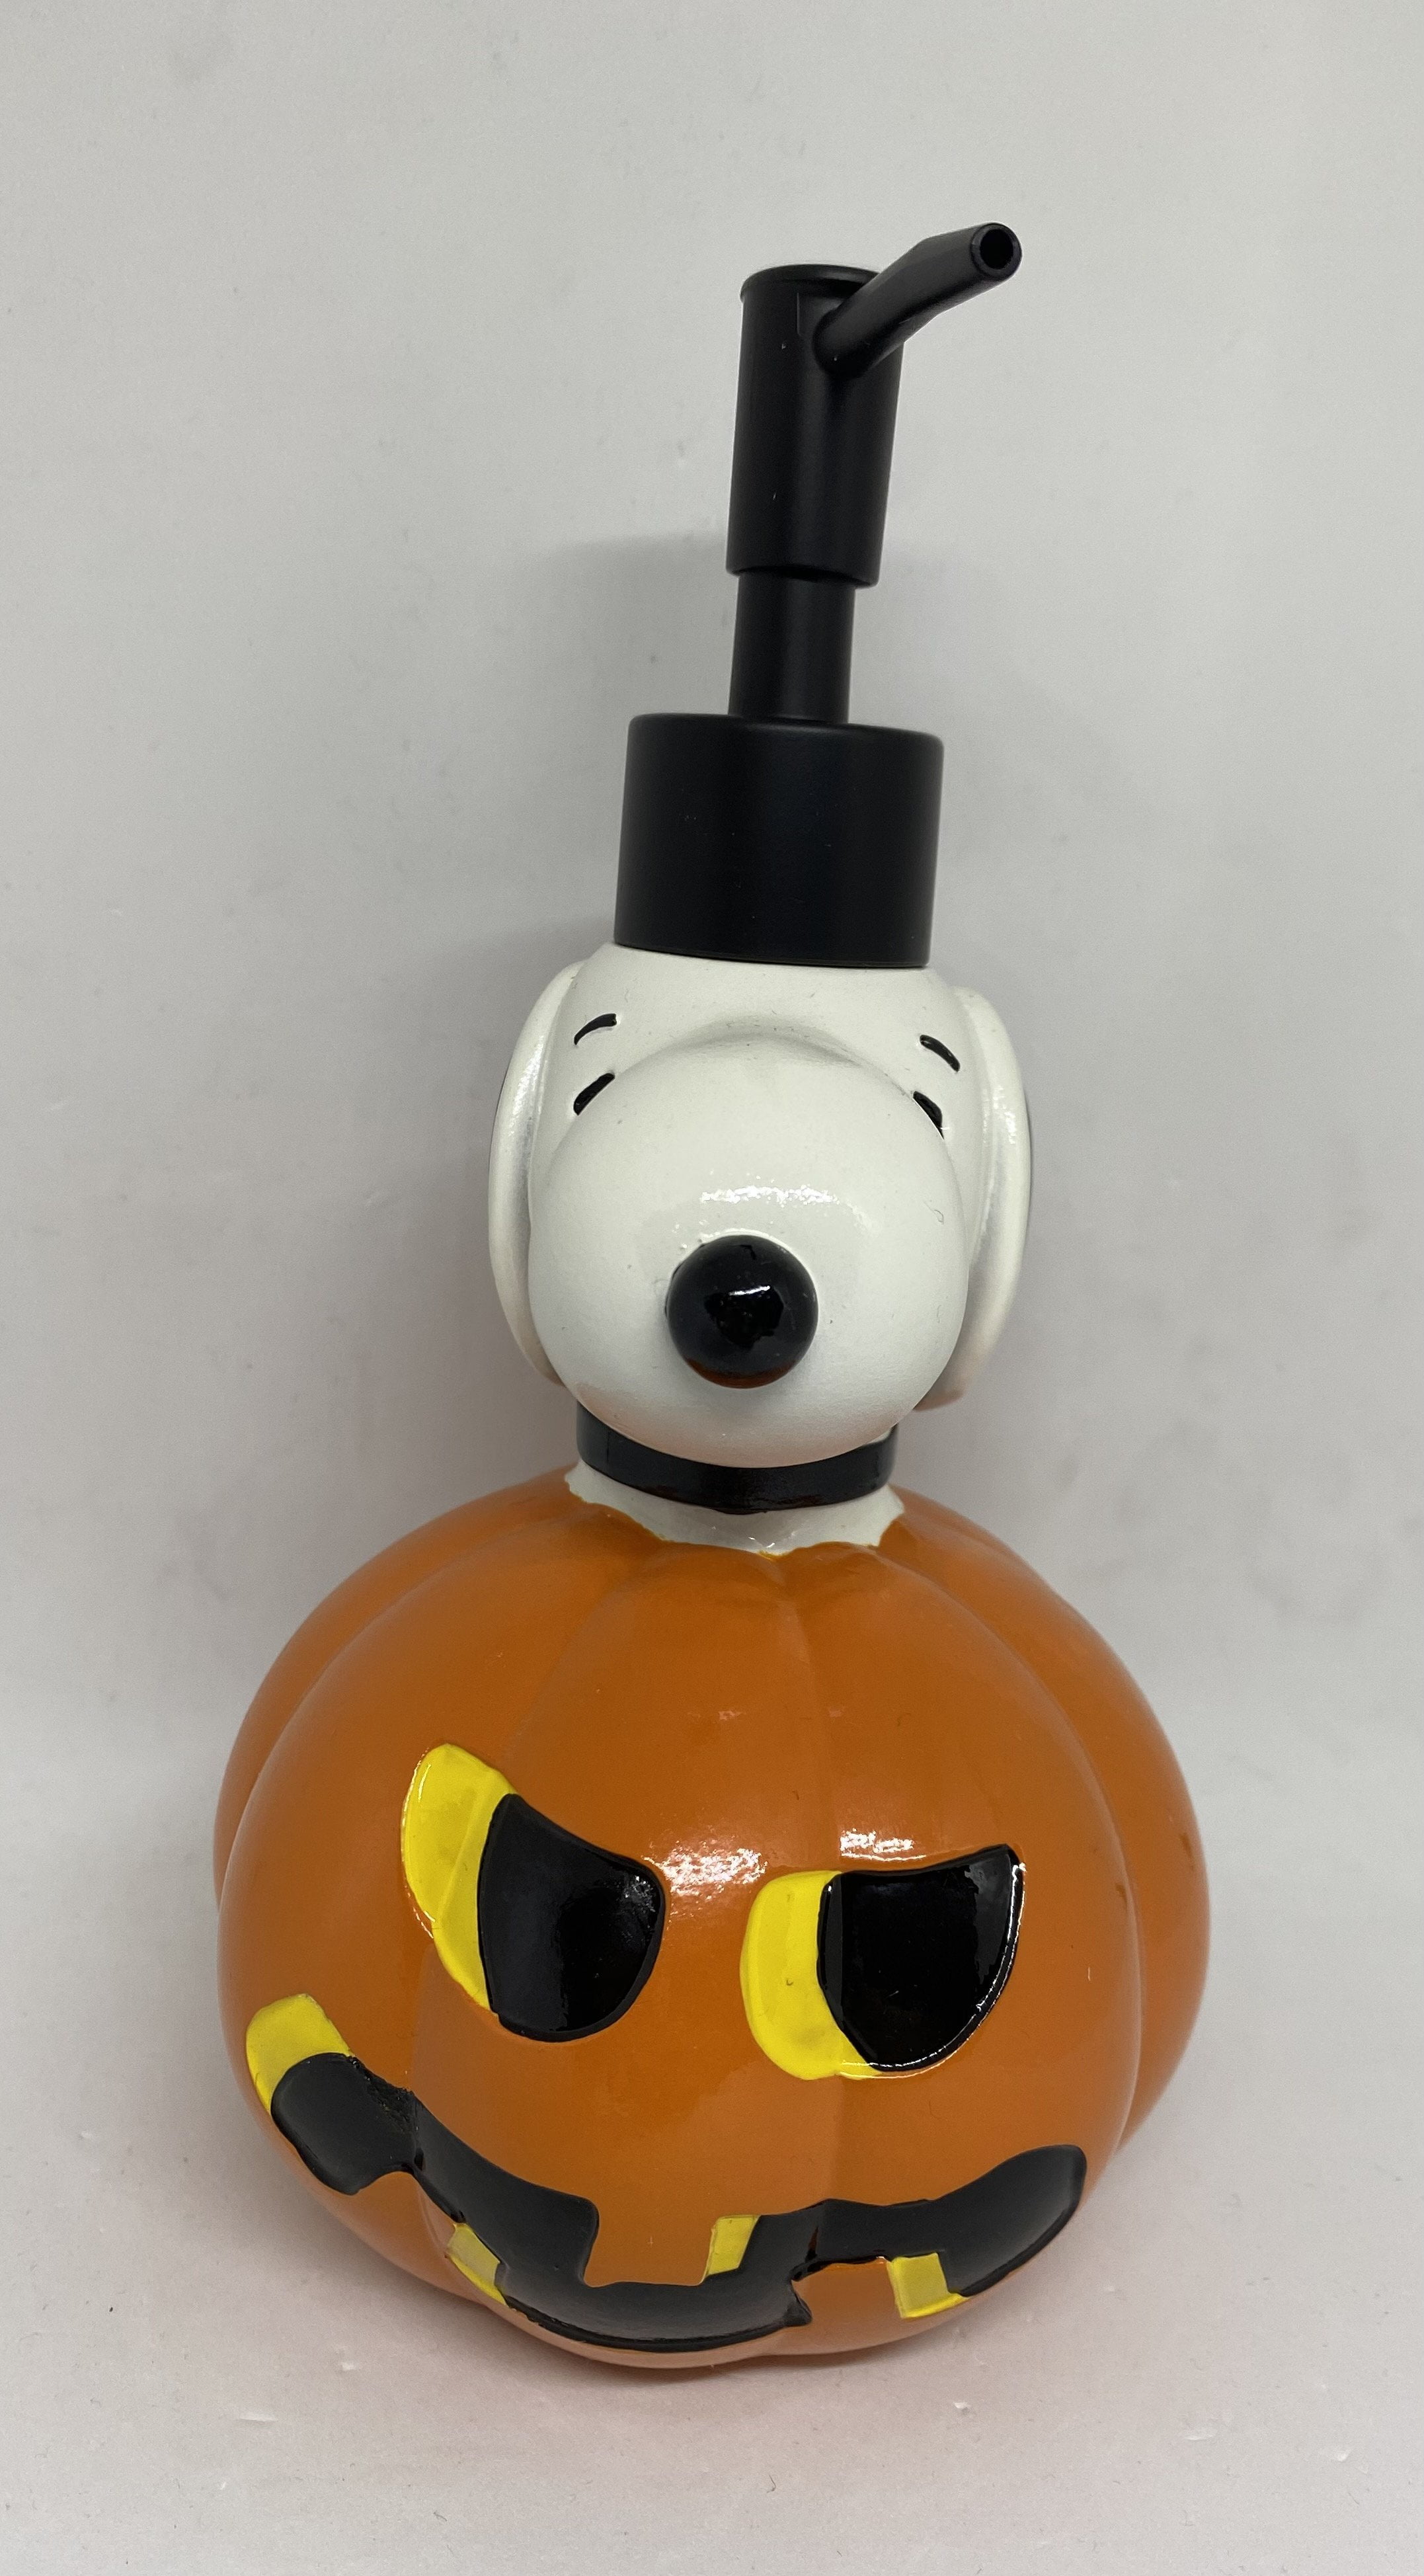 Details about  / Snoopy Holding Pumpkin Halloween Theme 13/" Plush Peanuts Toy Stuffed Animal